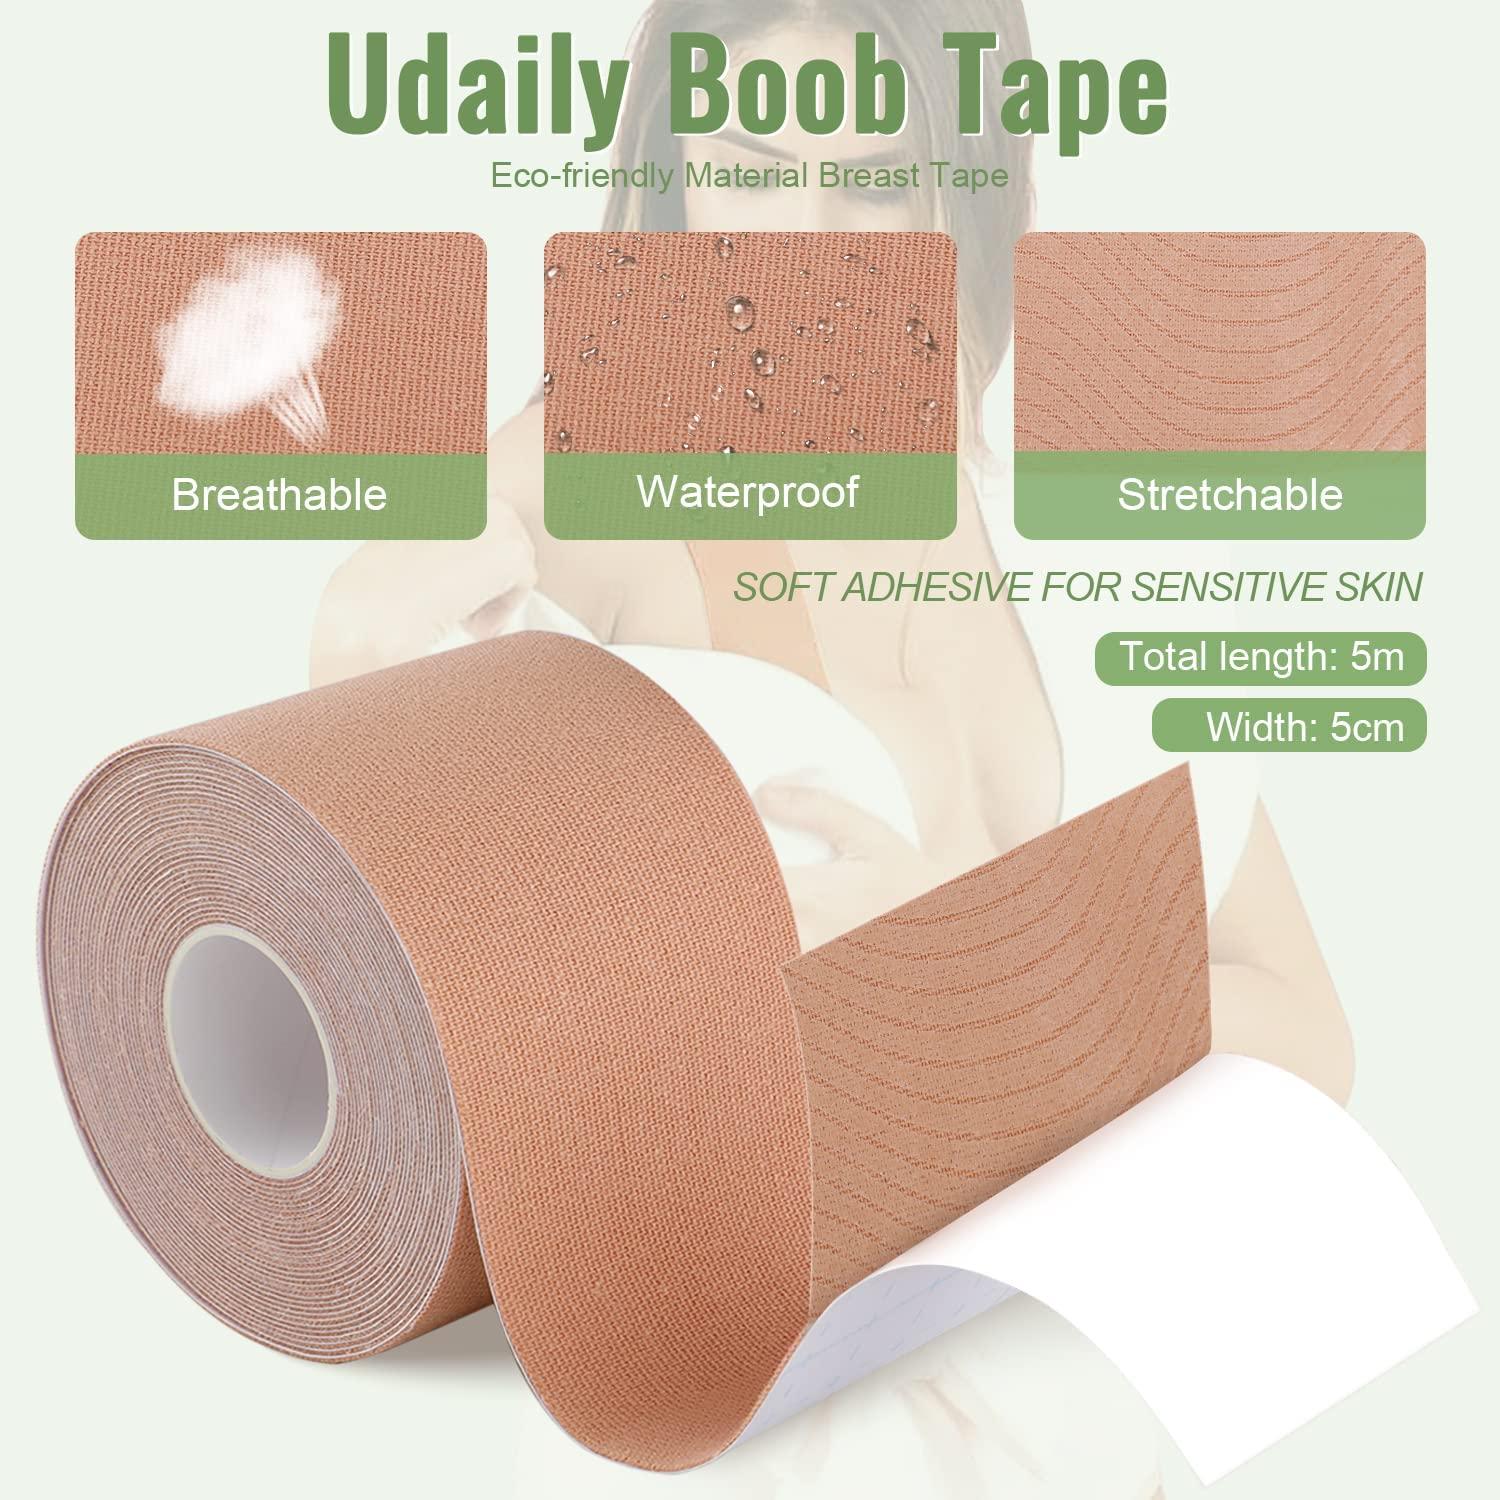 Boob Tape, Boobytape for Breast Lift, Bob Tape for Large Breast, Breathable  Push Up Tape, Waterproof & Sweatproof Body Tape, Used Along with 1-Pair  Reusable Silicone Covers Nude